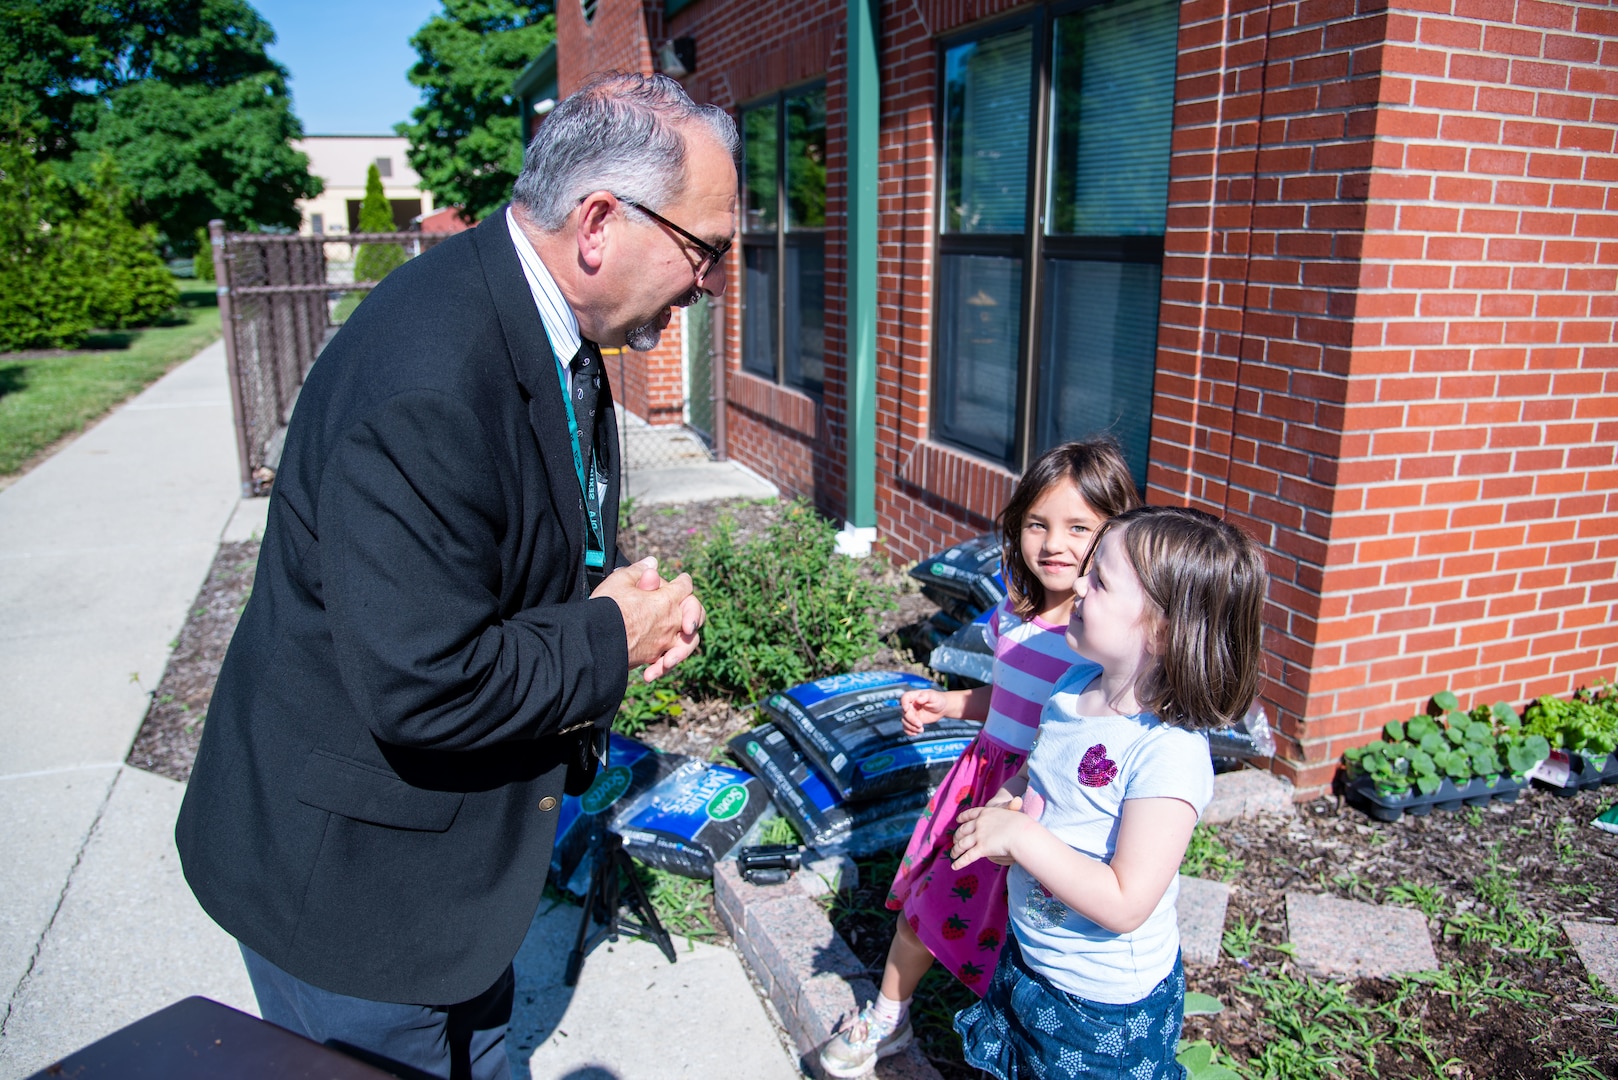 A man in a business suit talks with two children after they planted plants at the CDC garden.